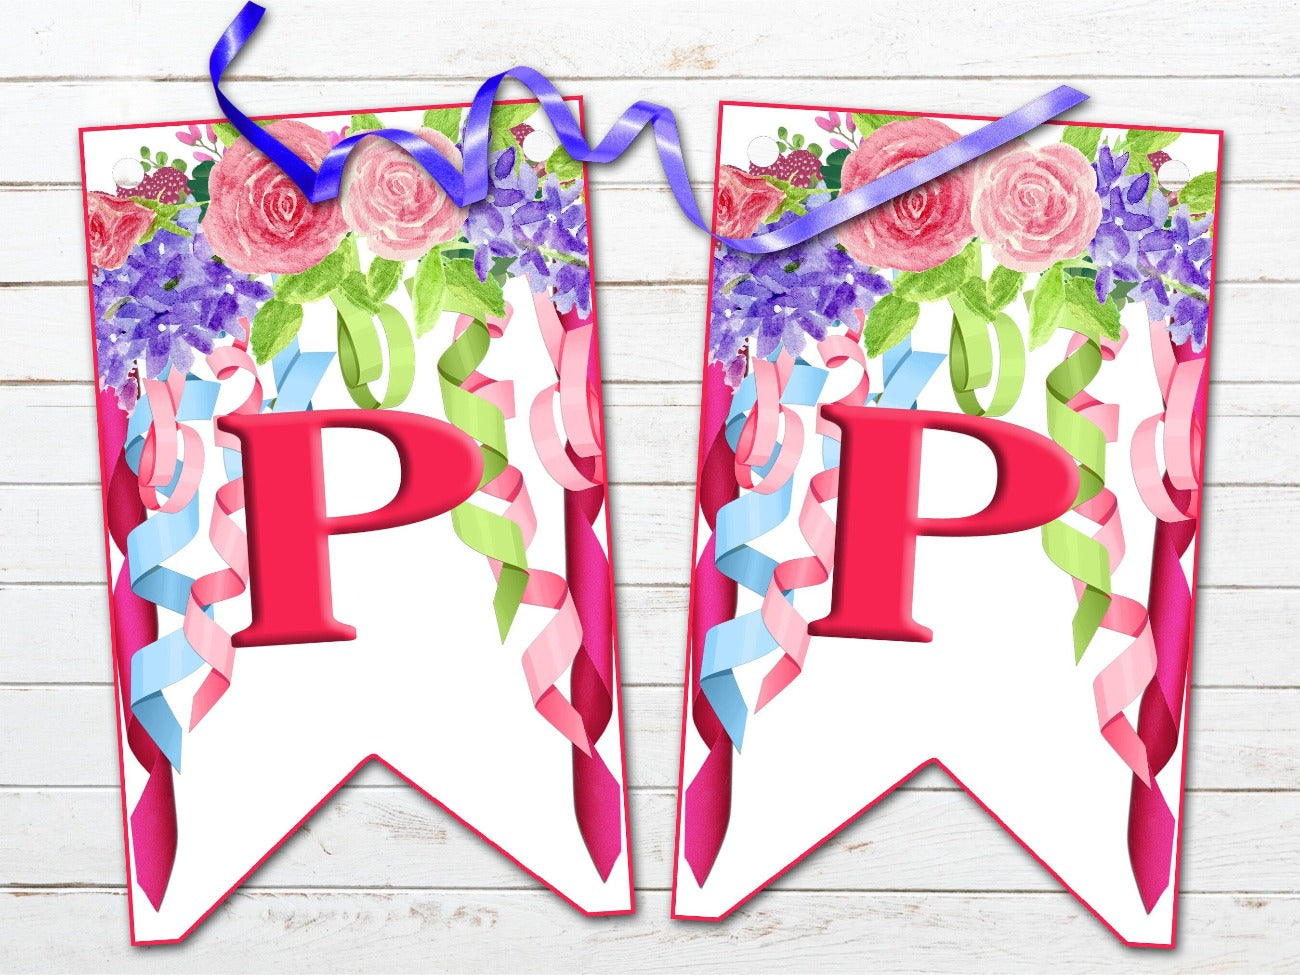 BELTANE BANNER, Pagan Altar Garland Decoration, P & P, each flag has pastel ribbons and flowers in colors of pink, mauve, green and blueoon a white background - Morgana Magick Spell